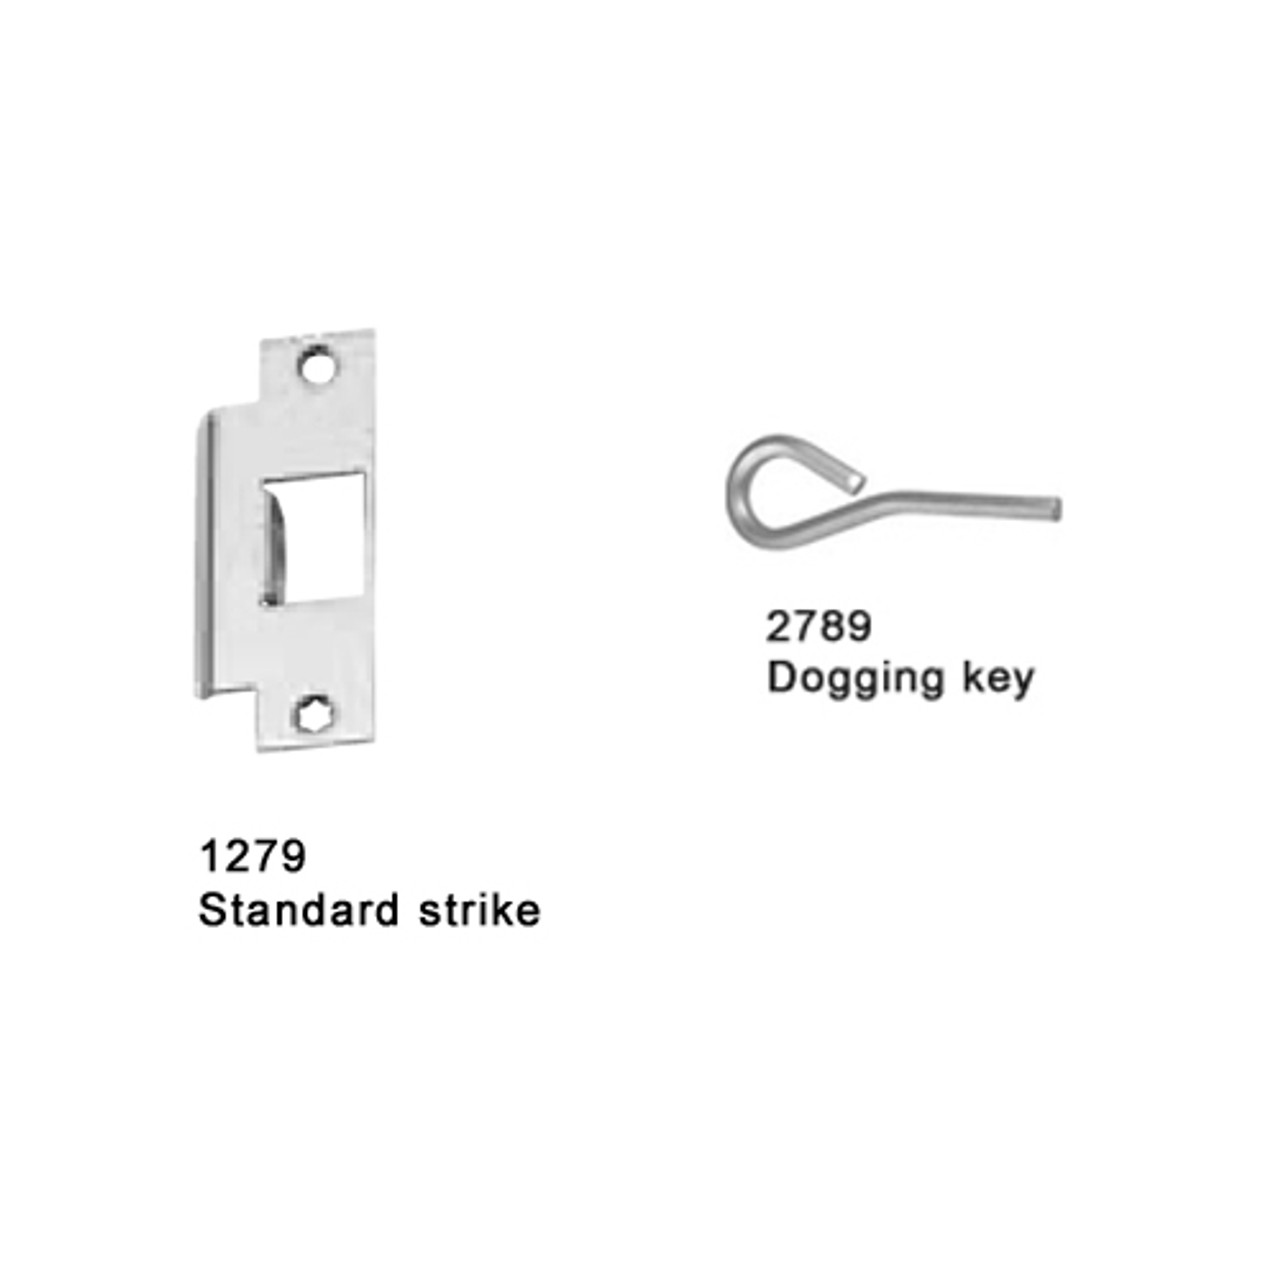 25-M-L-NL-DANE-US26-4-LHR Falcon 25 Series Mortise Lock Devices 510L-NL Dane Lever Trim with Night Latch in Polished Chrome